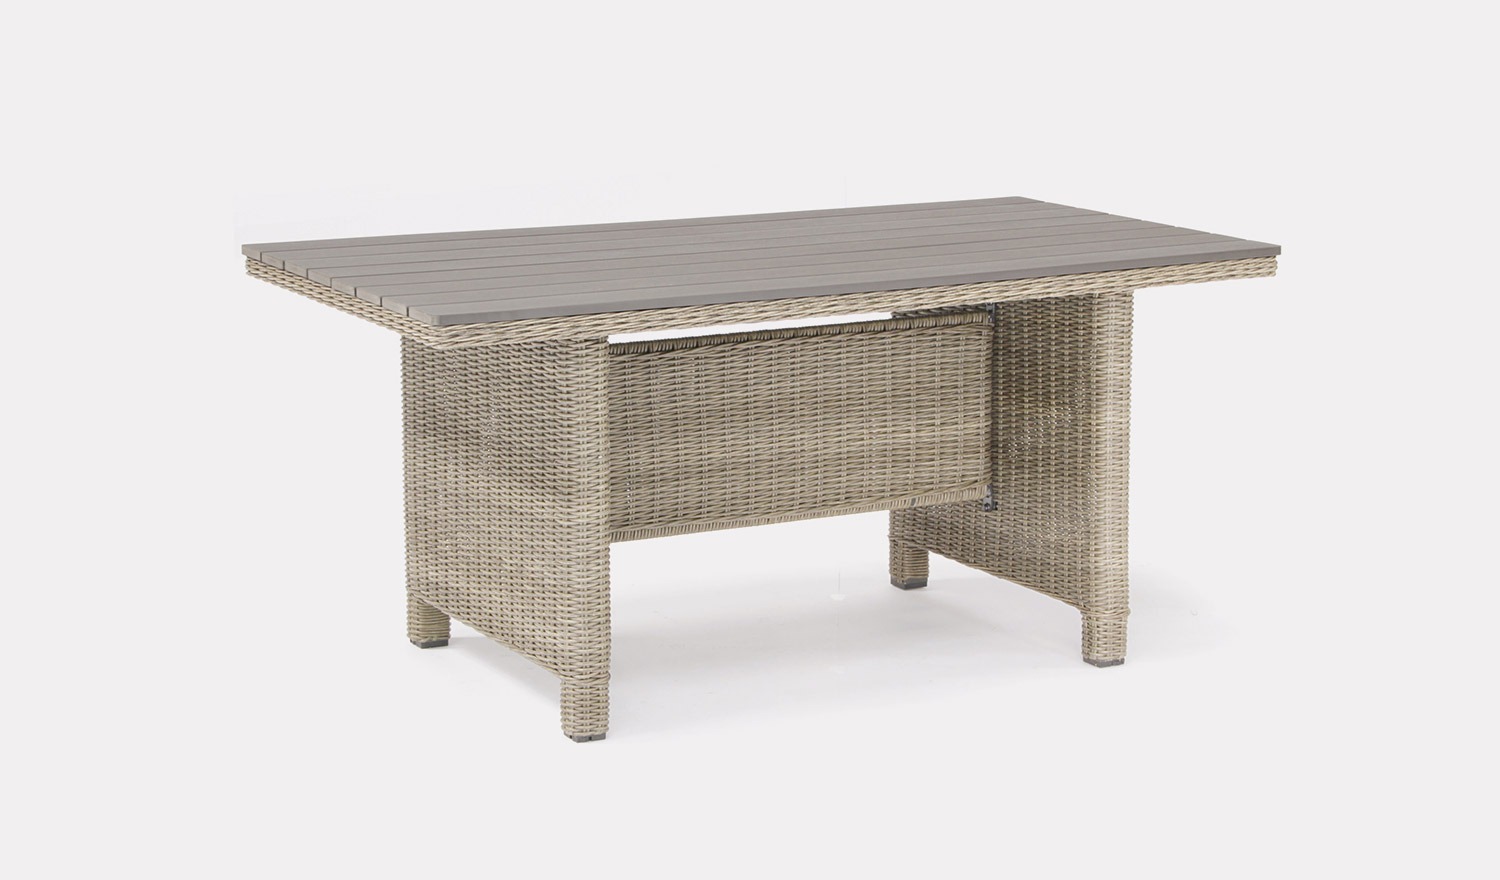 worth £440 new. KETTLER Kettler Palma GARDEN table ONLY with furniture cover 